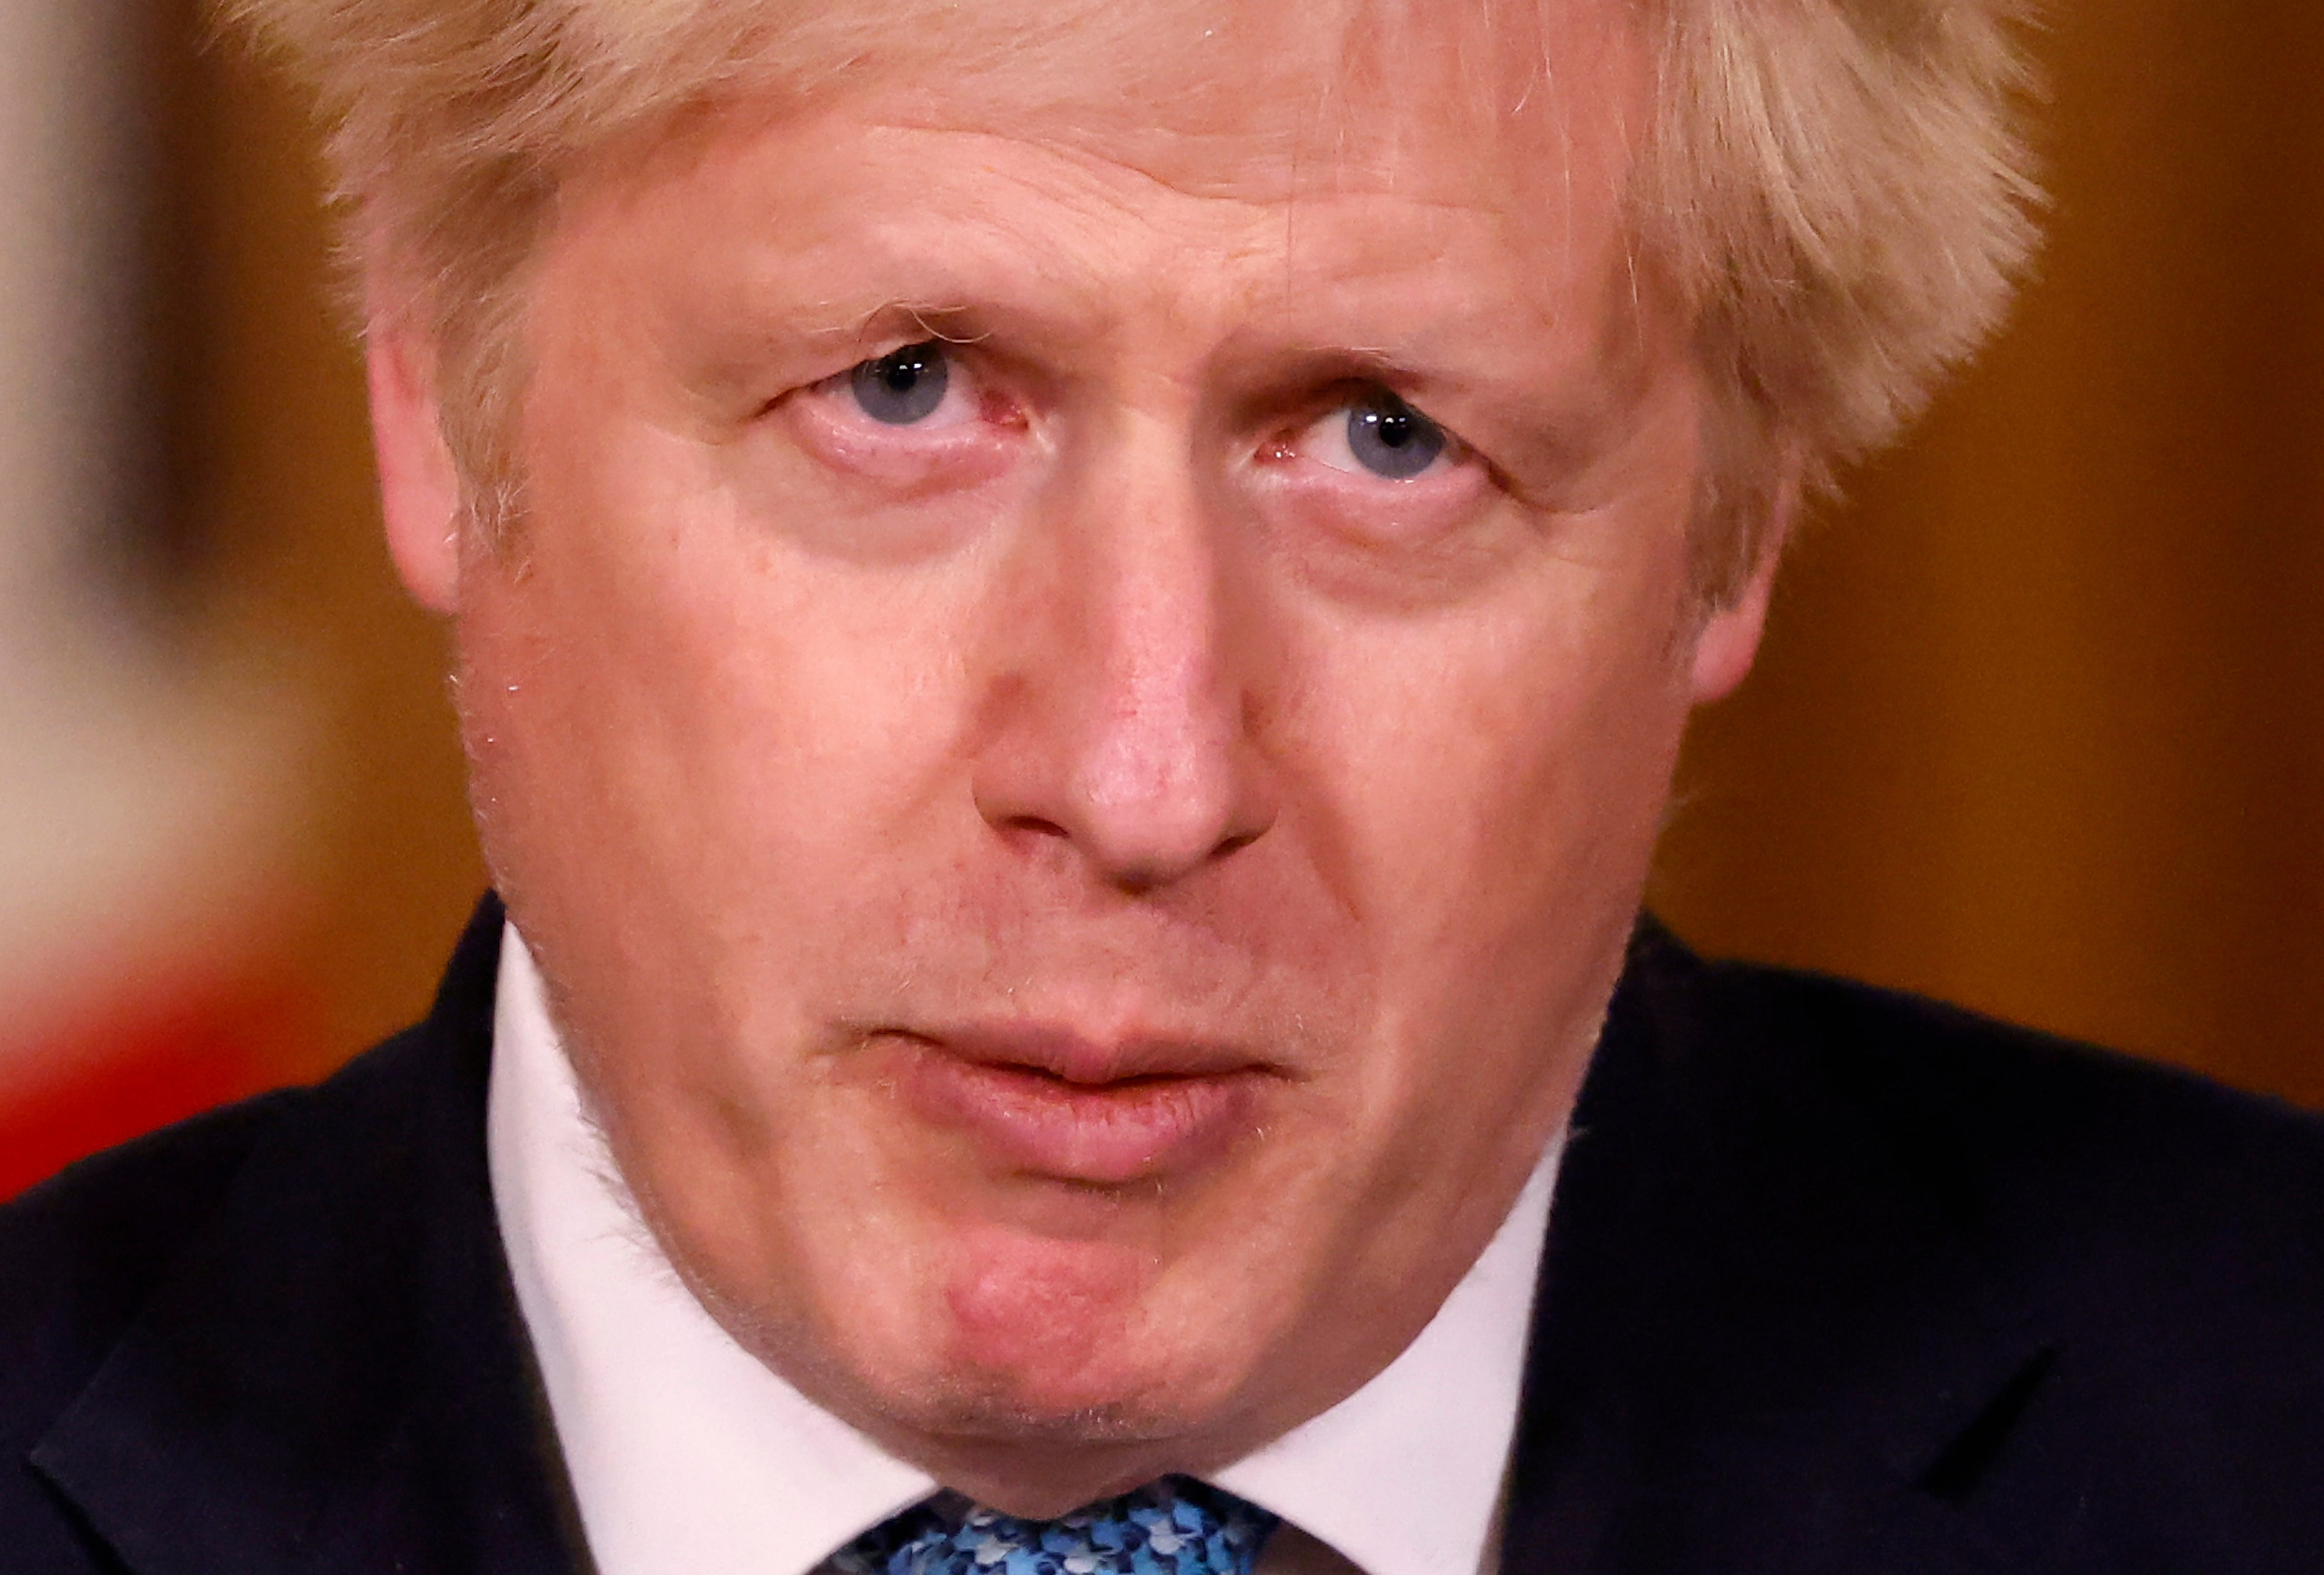 Prime Minister Boris Johnson has announced a Brexit deal – but don’t believe the spin